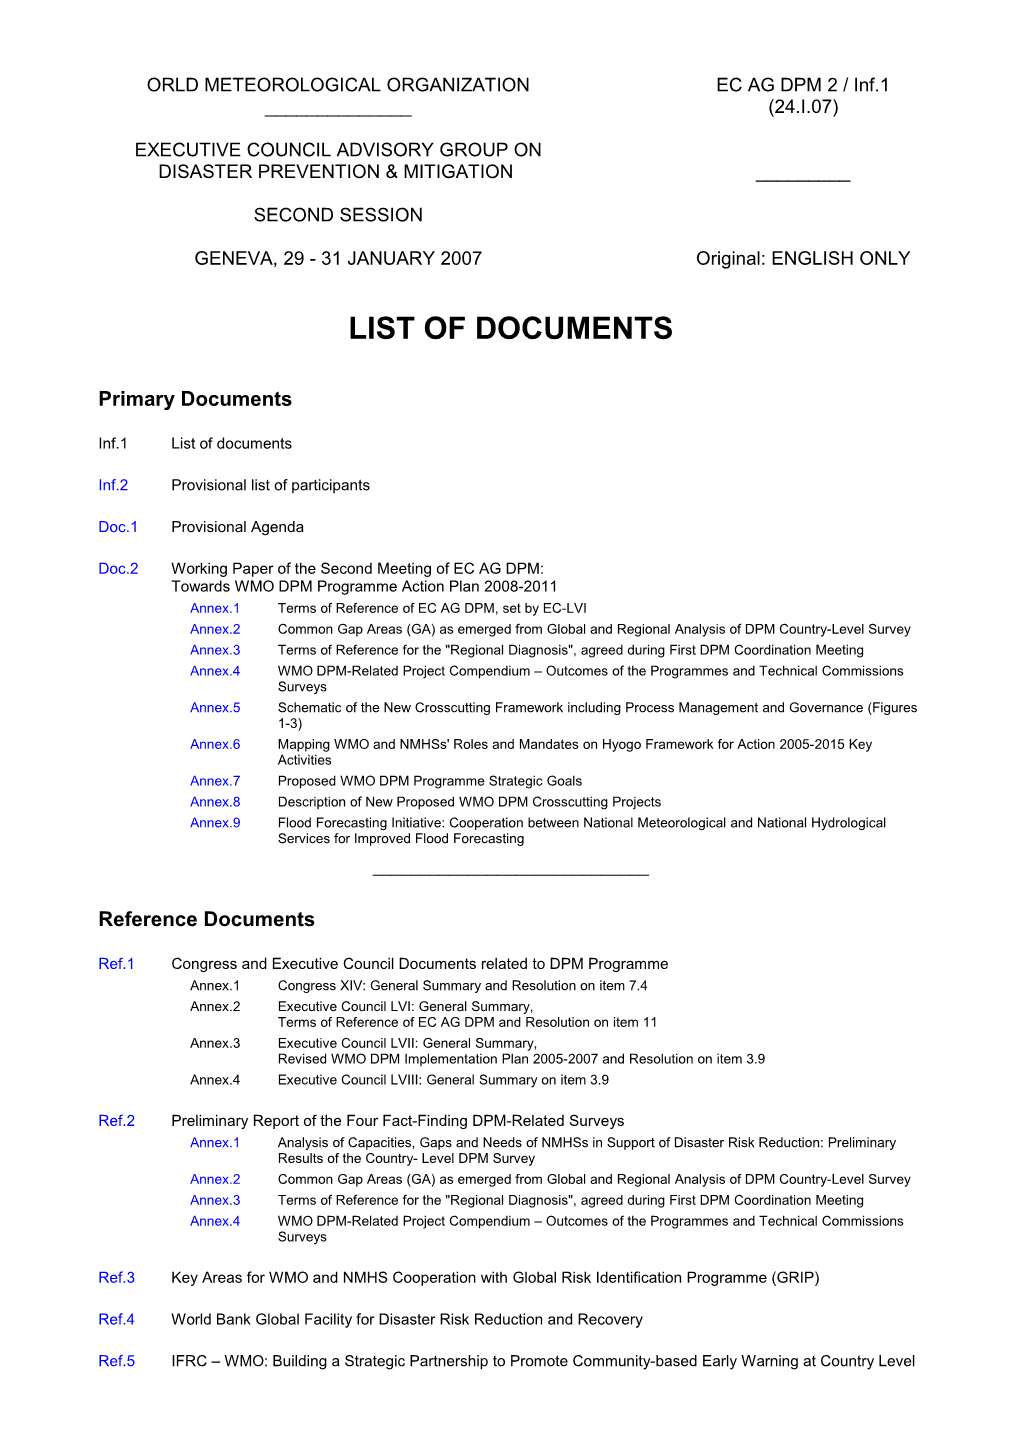 List of Documents